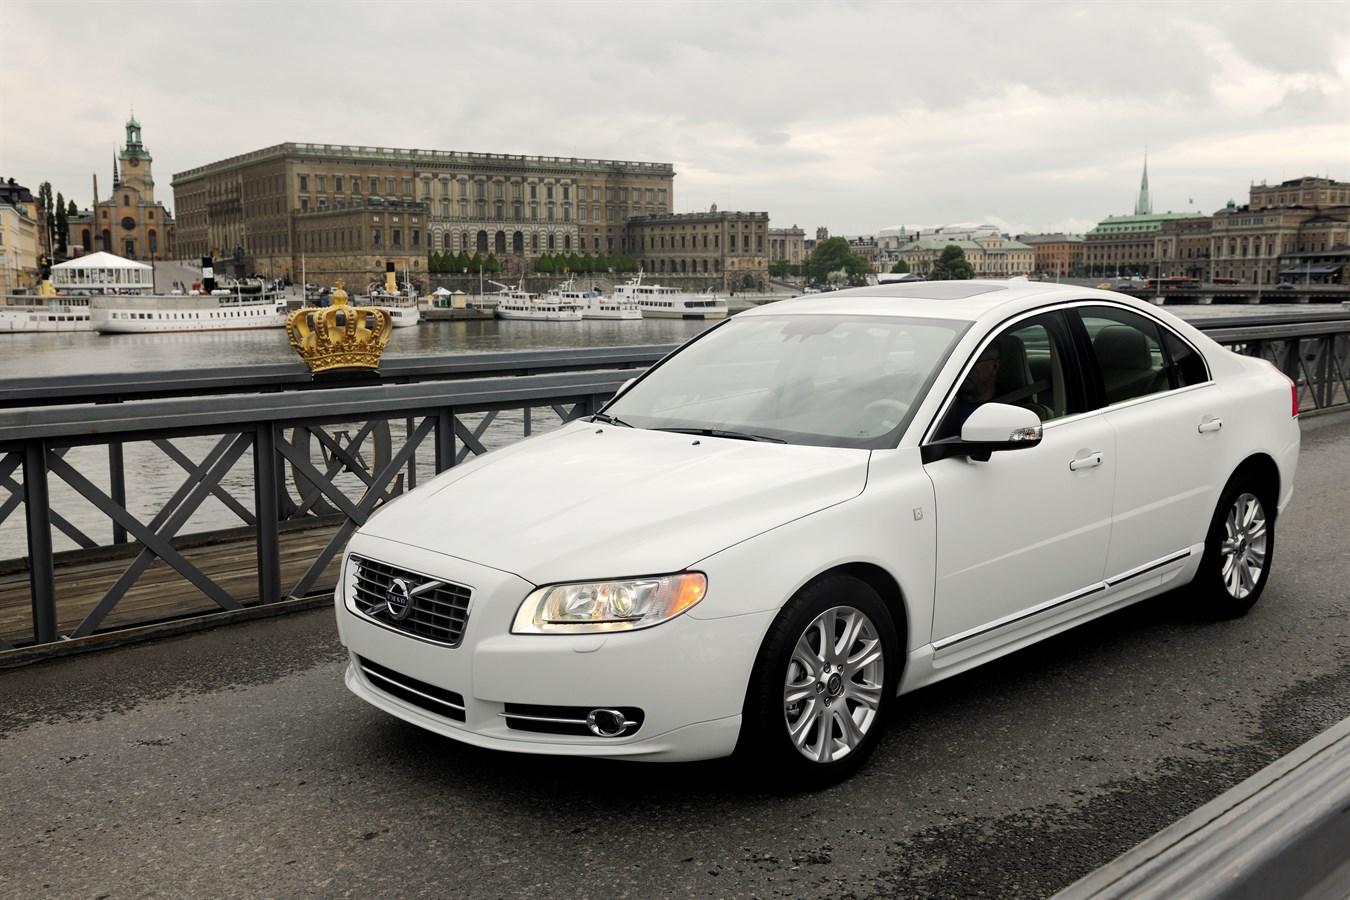 Volvo S80 specially designed for the royal wedding 2010